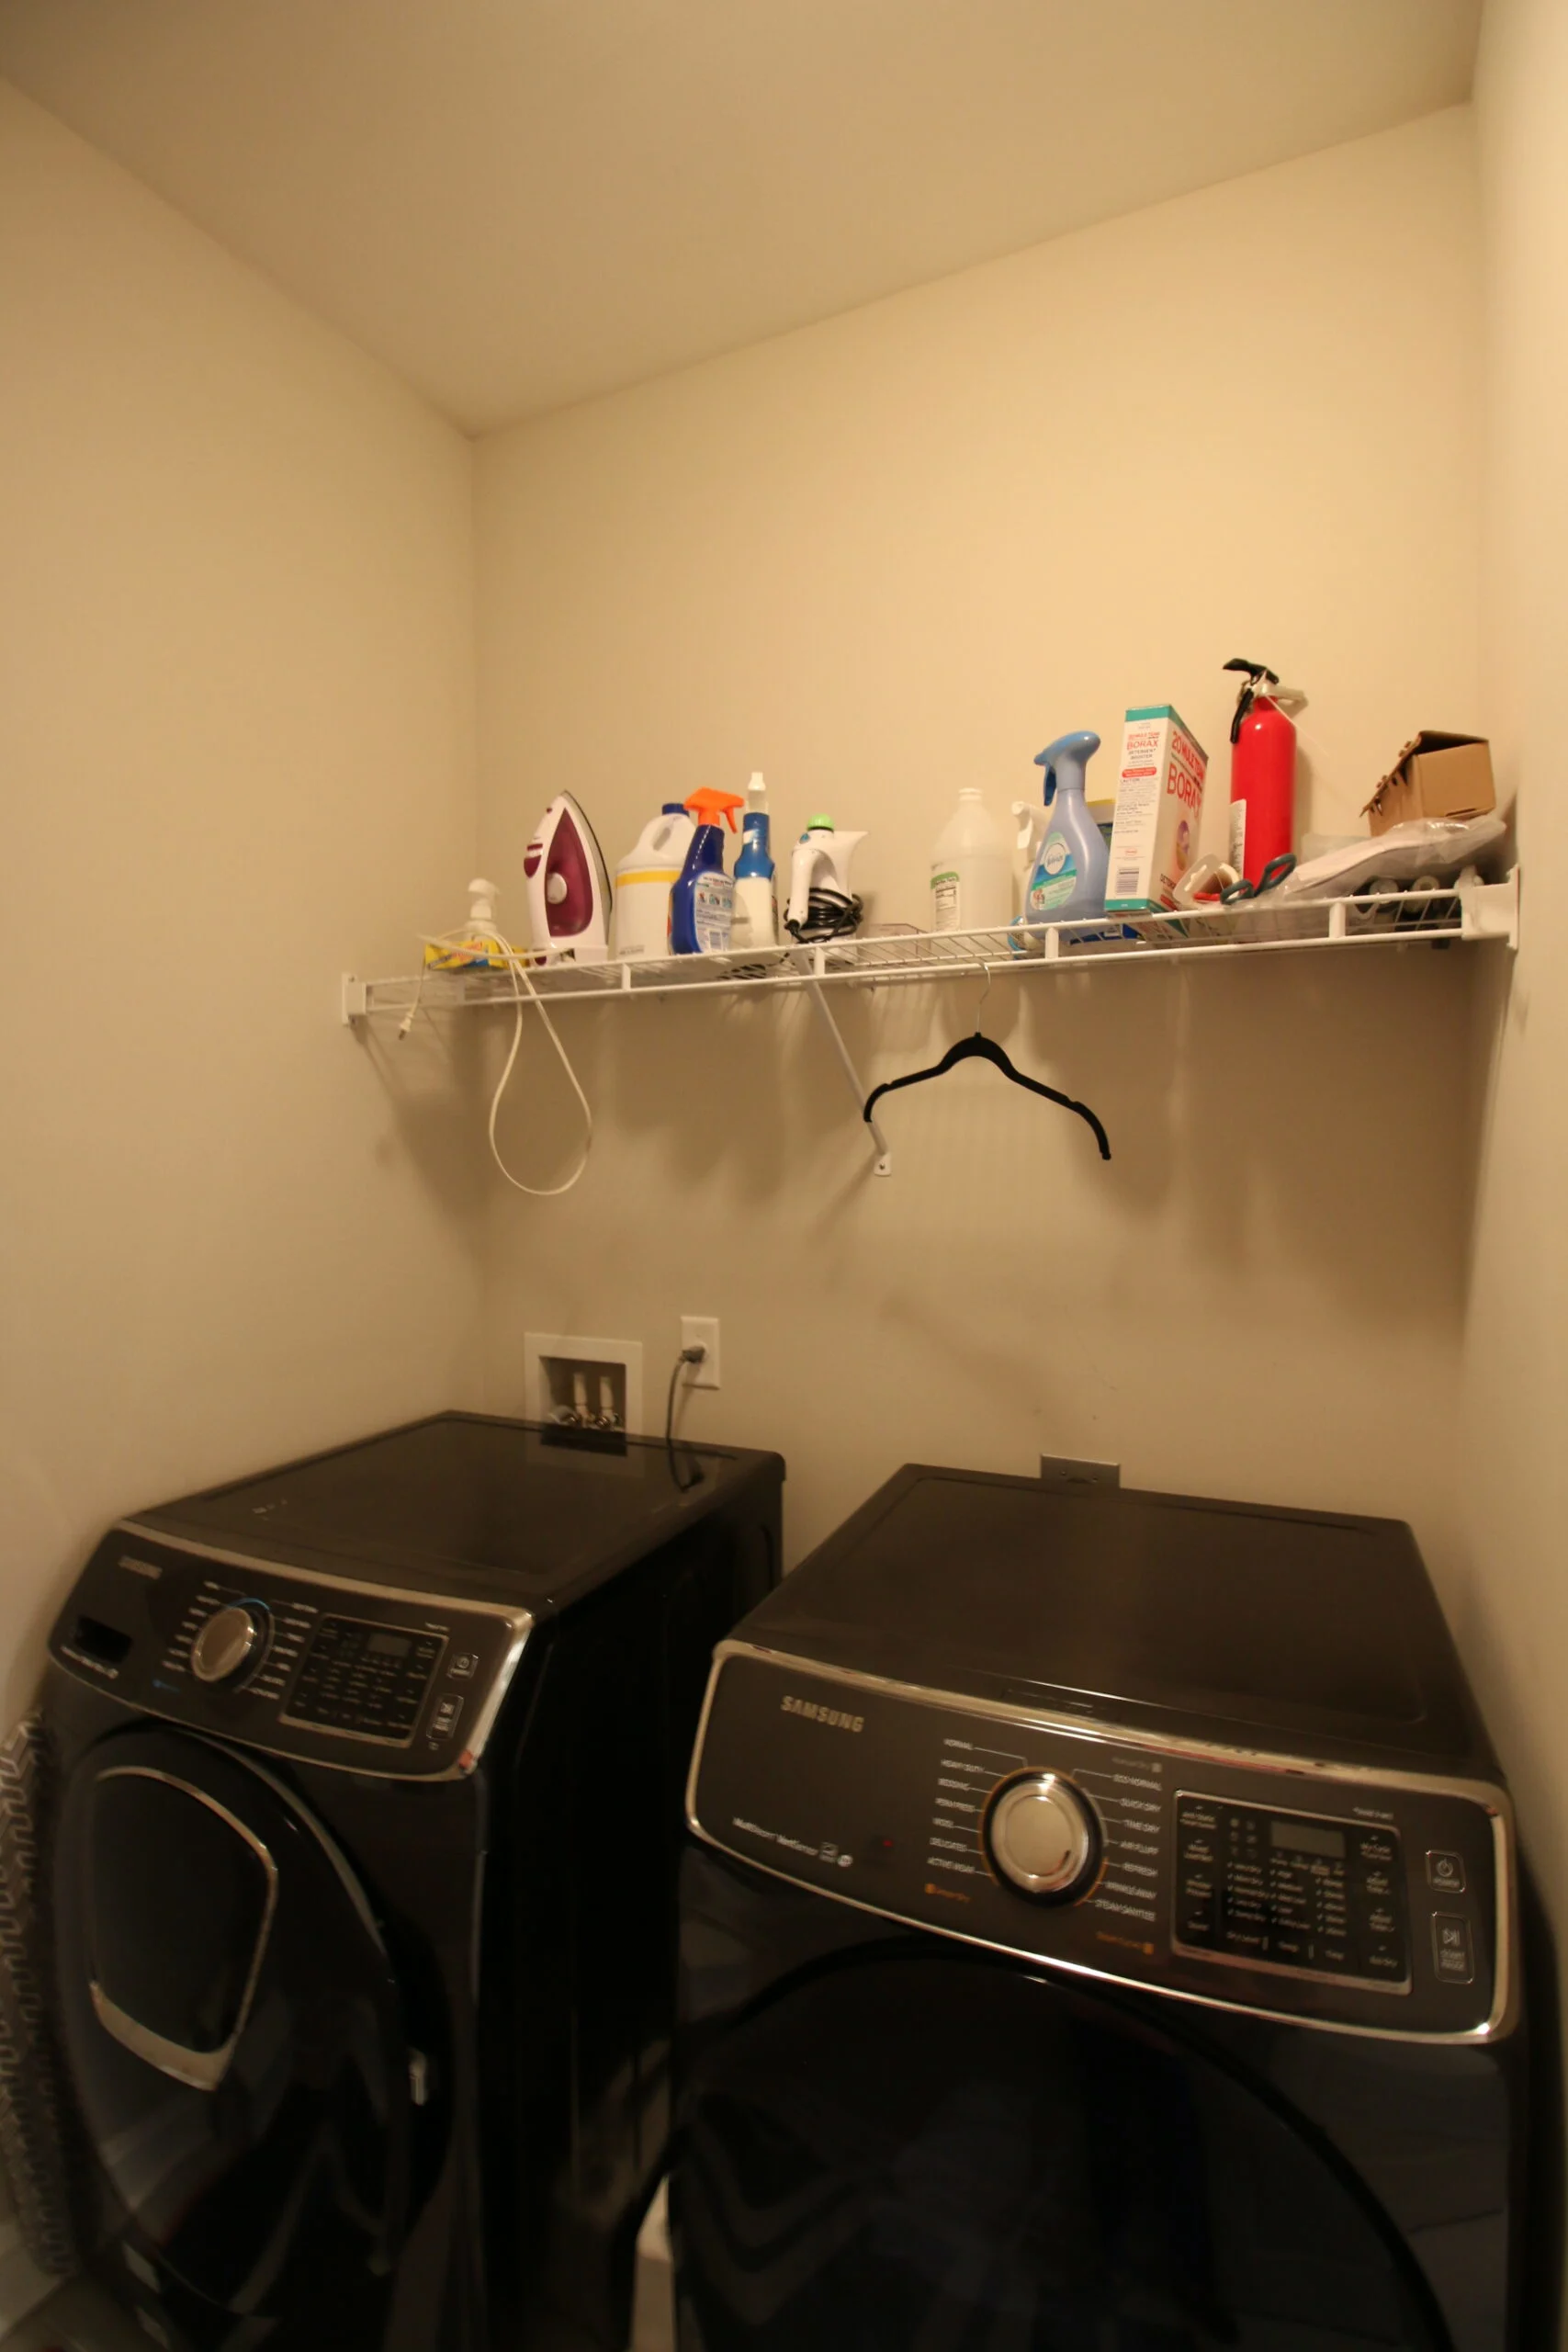 Boring old laundry room